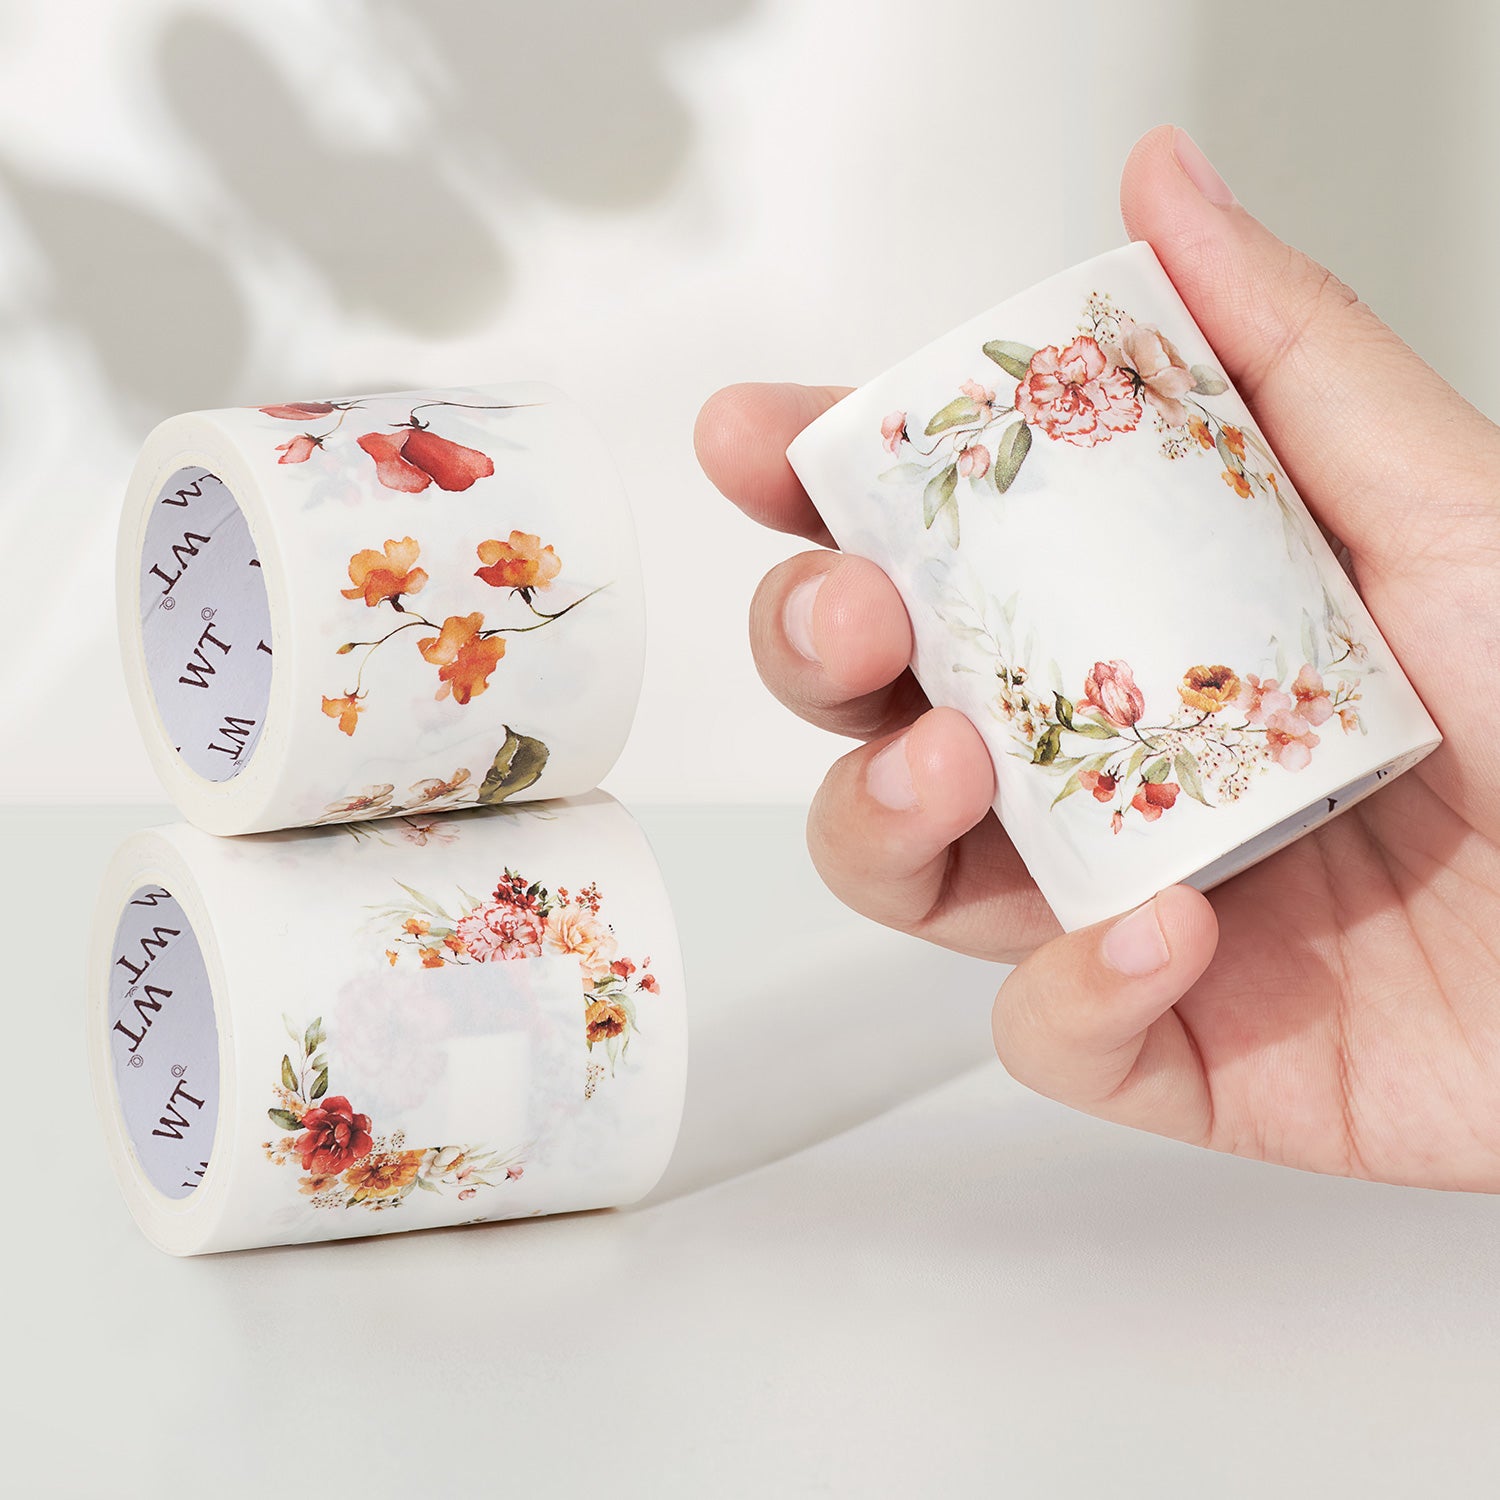 35mm Width OKMT TAPE Dried Flowers Bouquets Leaves Washi Masking Tape 